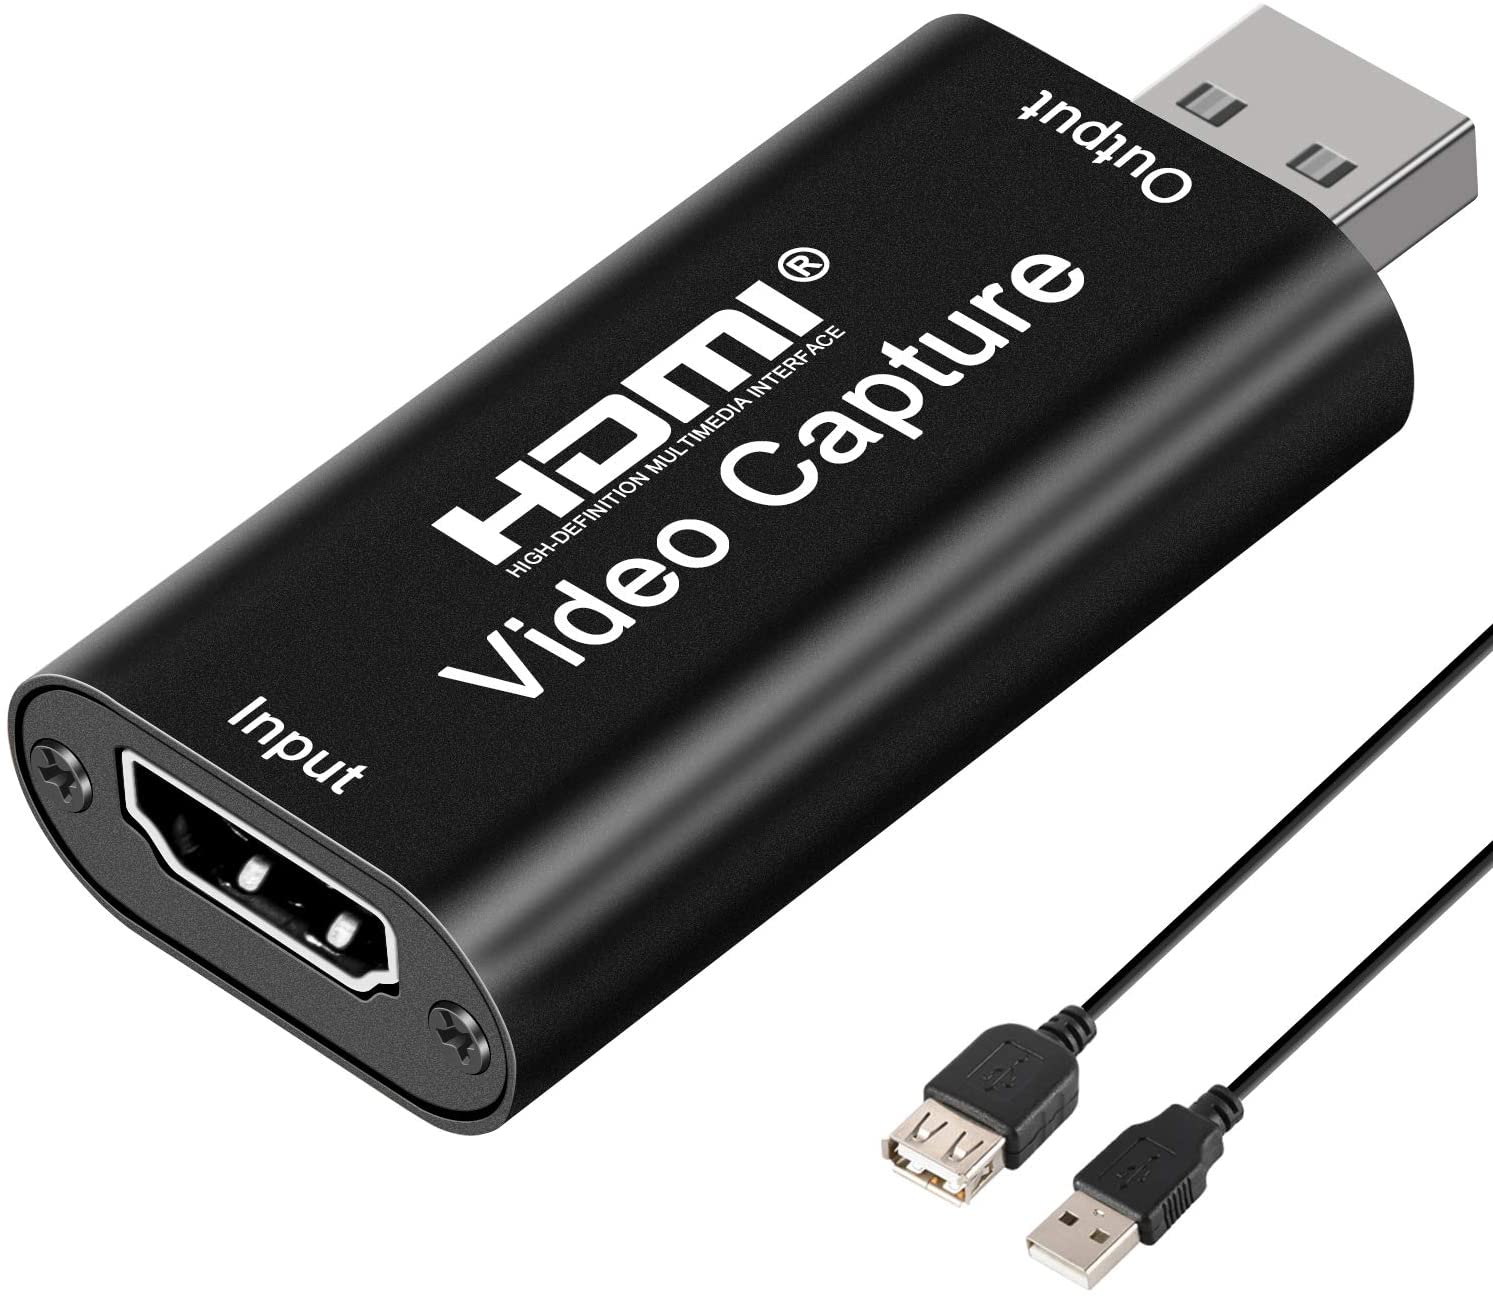 Audio Video Capture Cards HDMI Video Capture HDMI to USB, Full HD 1080p USB 2.0 Record